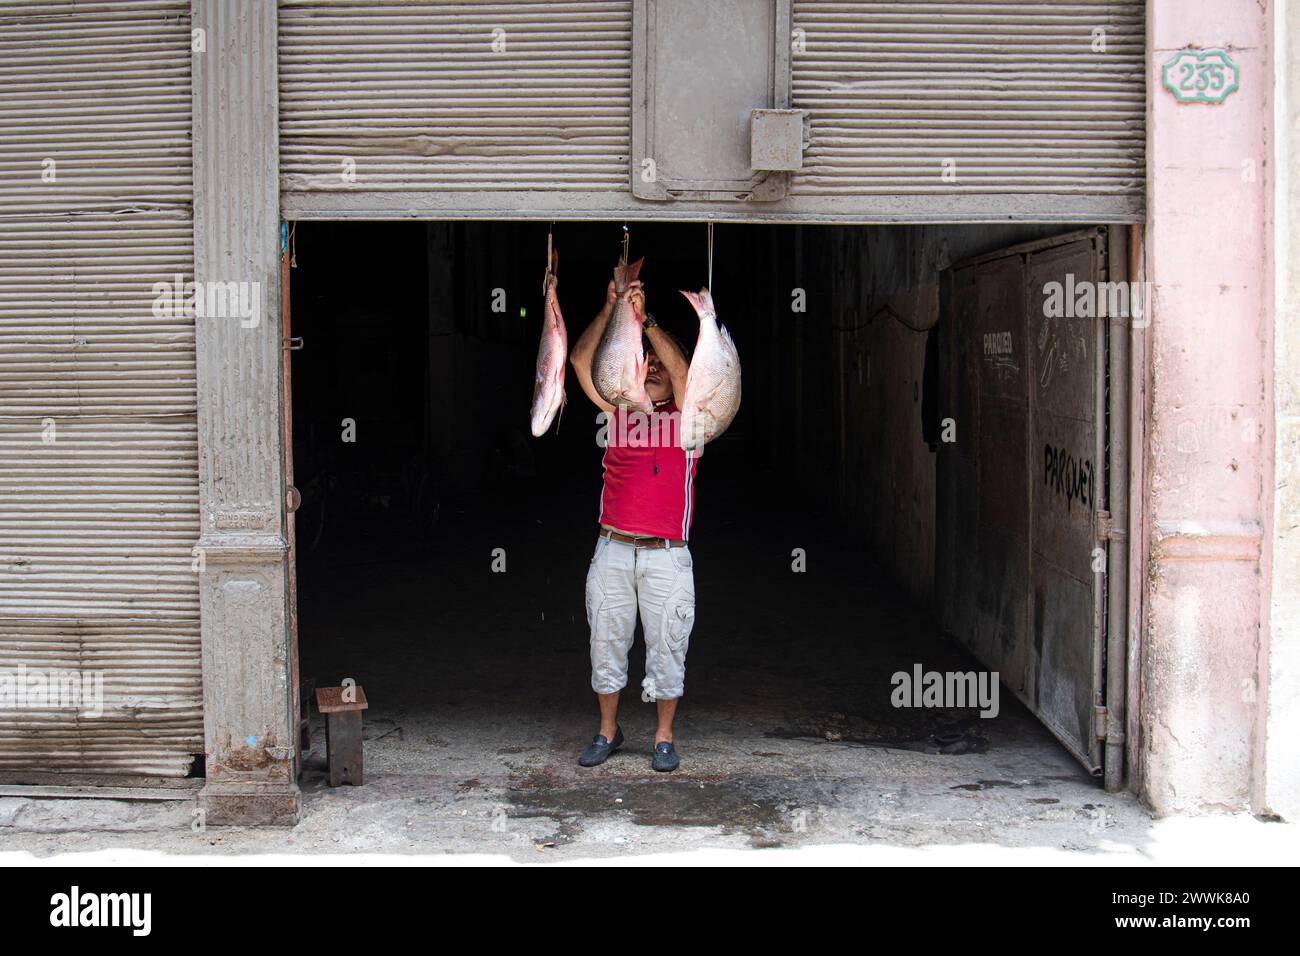 Cuban man hangs different types fish to sell at a market in Havana, Cuba Stock Photo